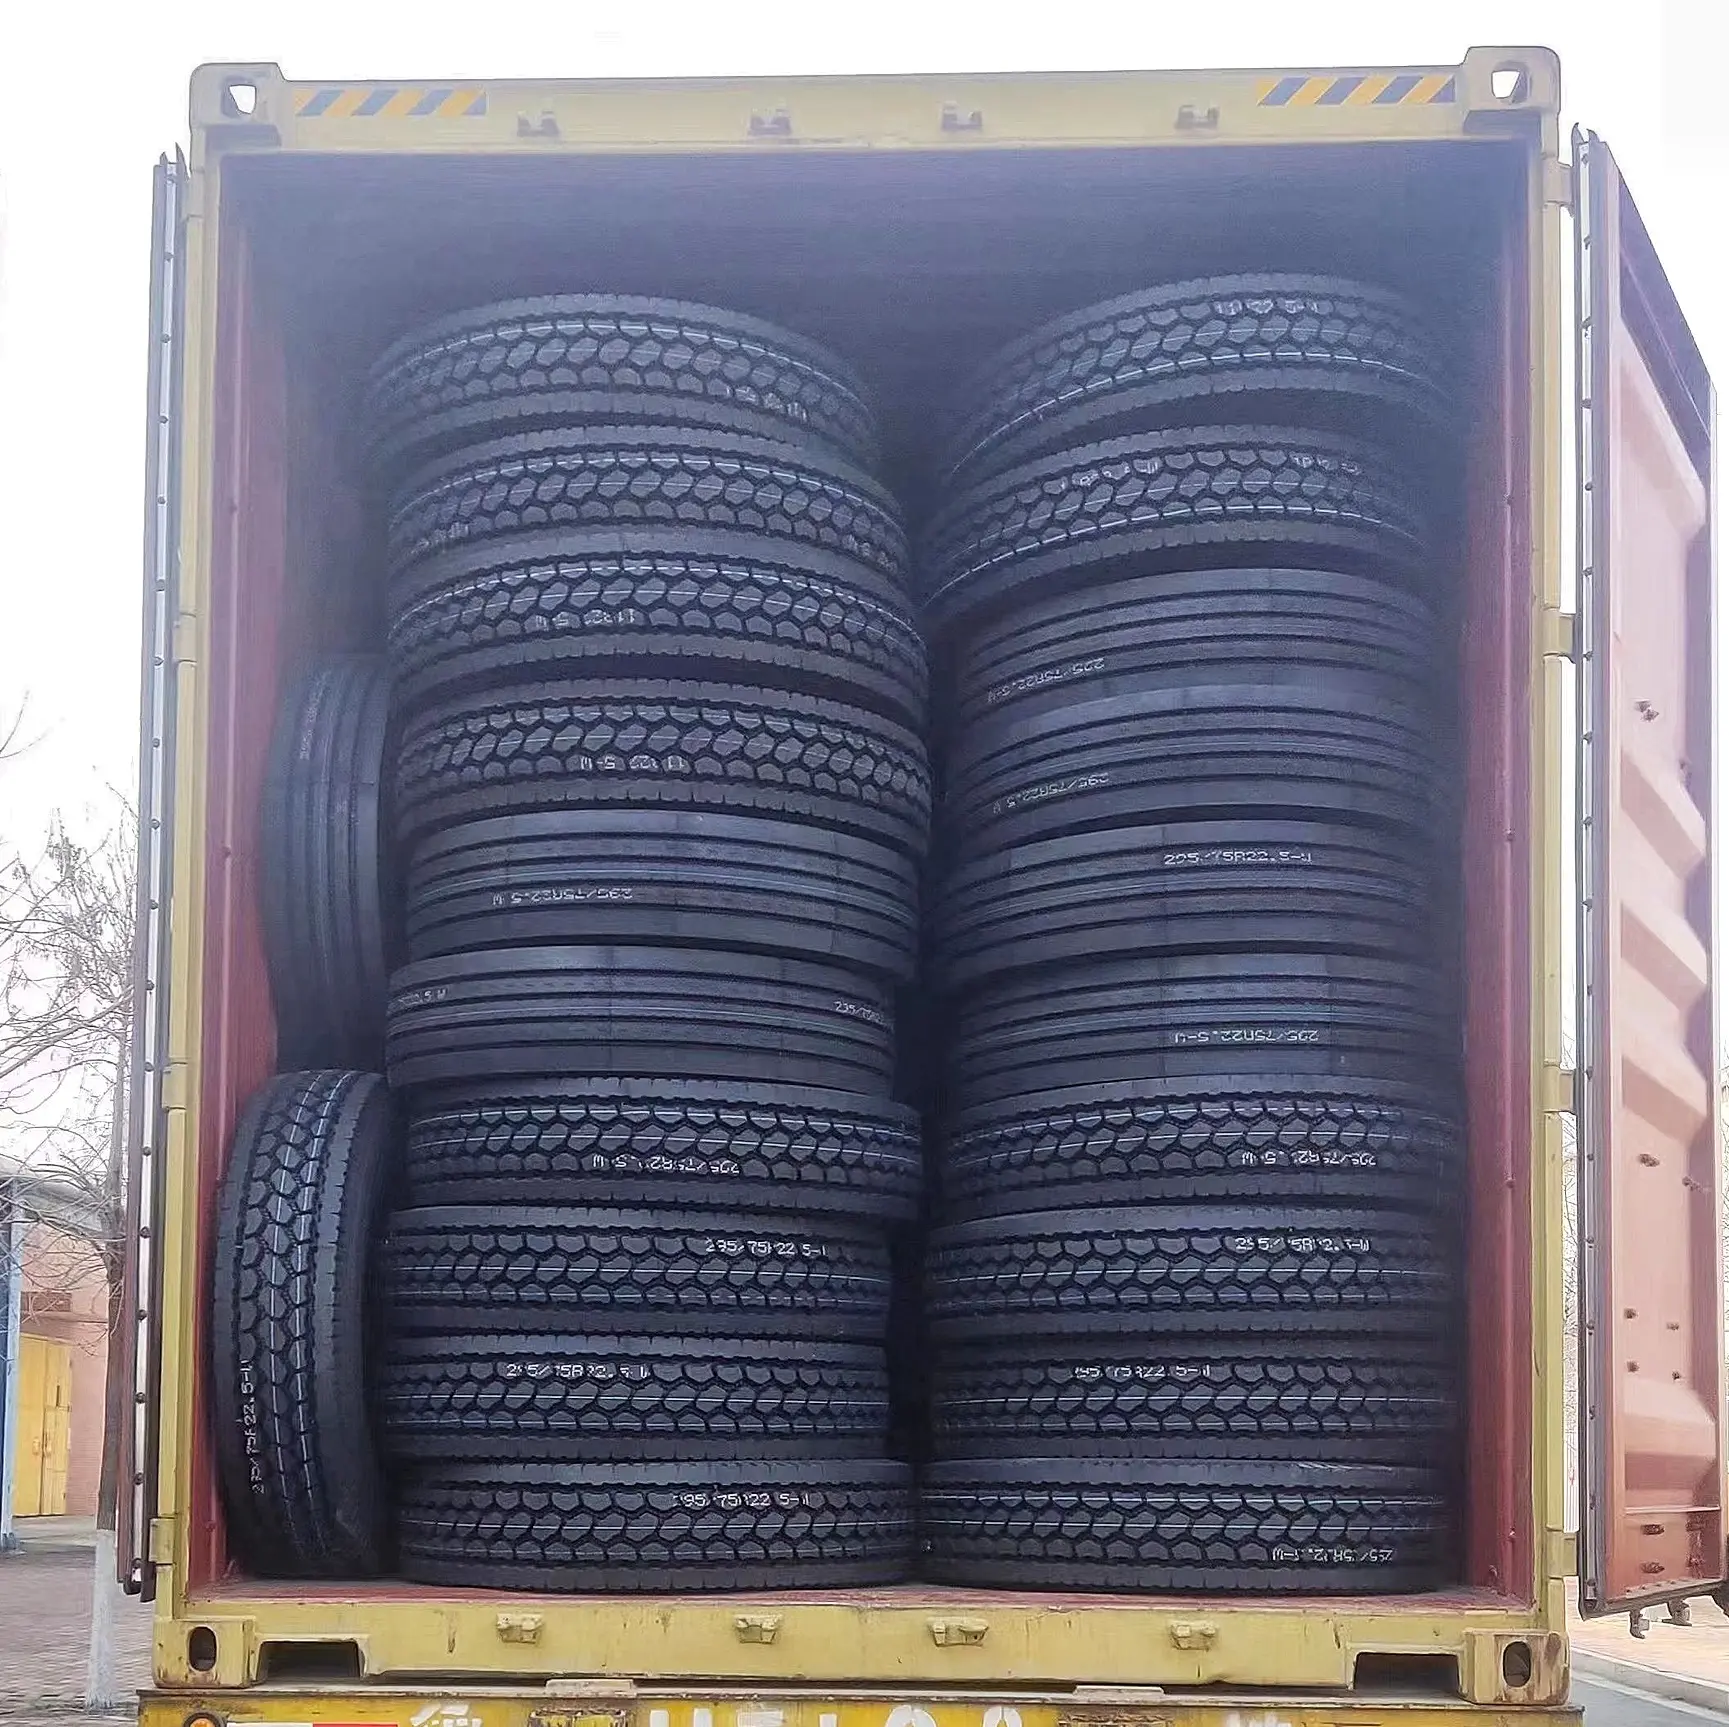 USA DOT approved 295 75R22.5 tires for trucks longmarch factory 295 75 22.5 truck tires commercial steer 11r22.5 truck tires